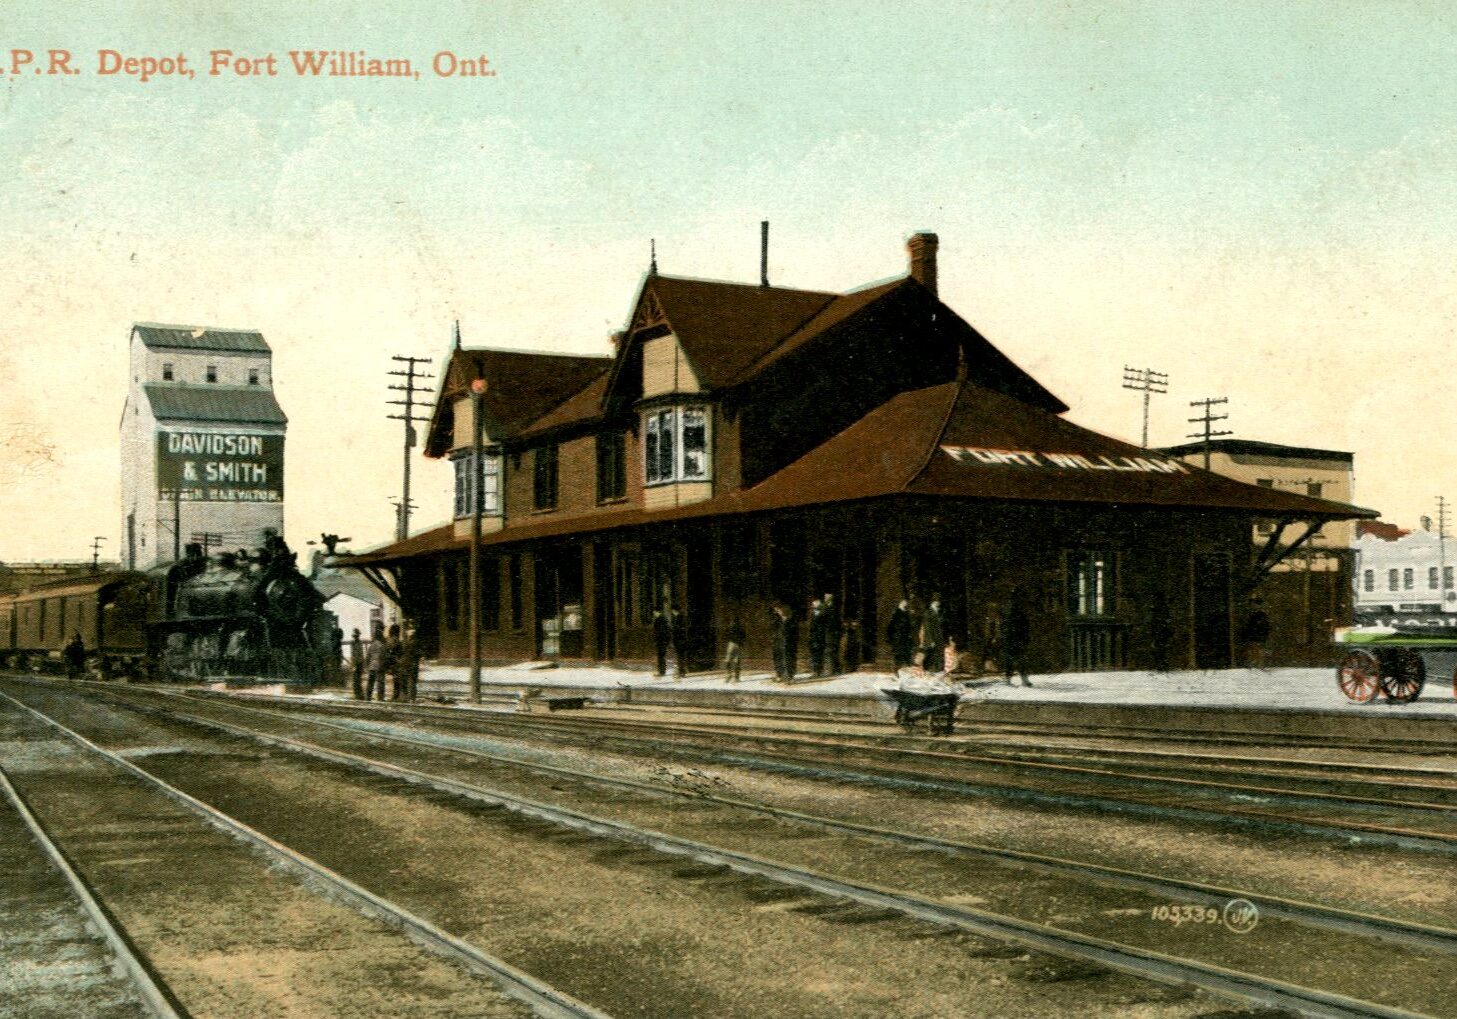 CPR Depot and Davidson and Smith Inland Elevator